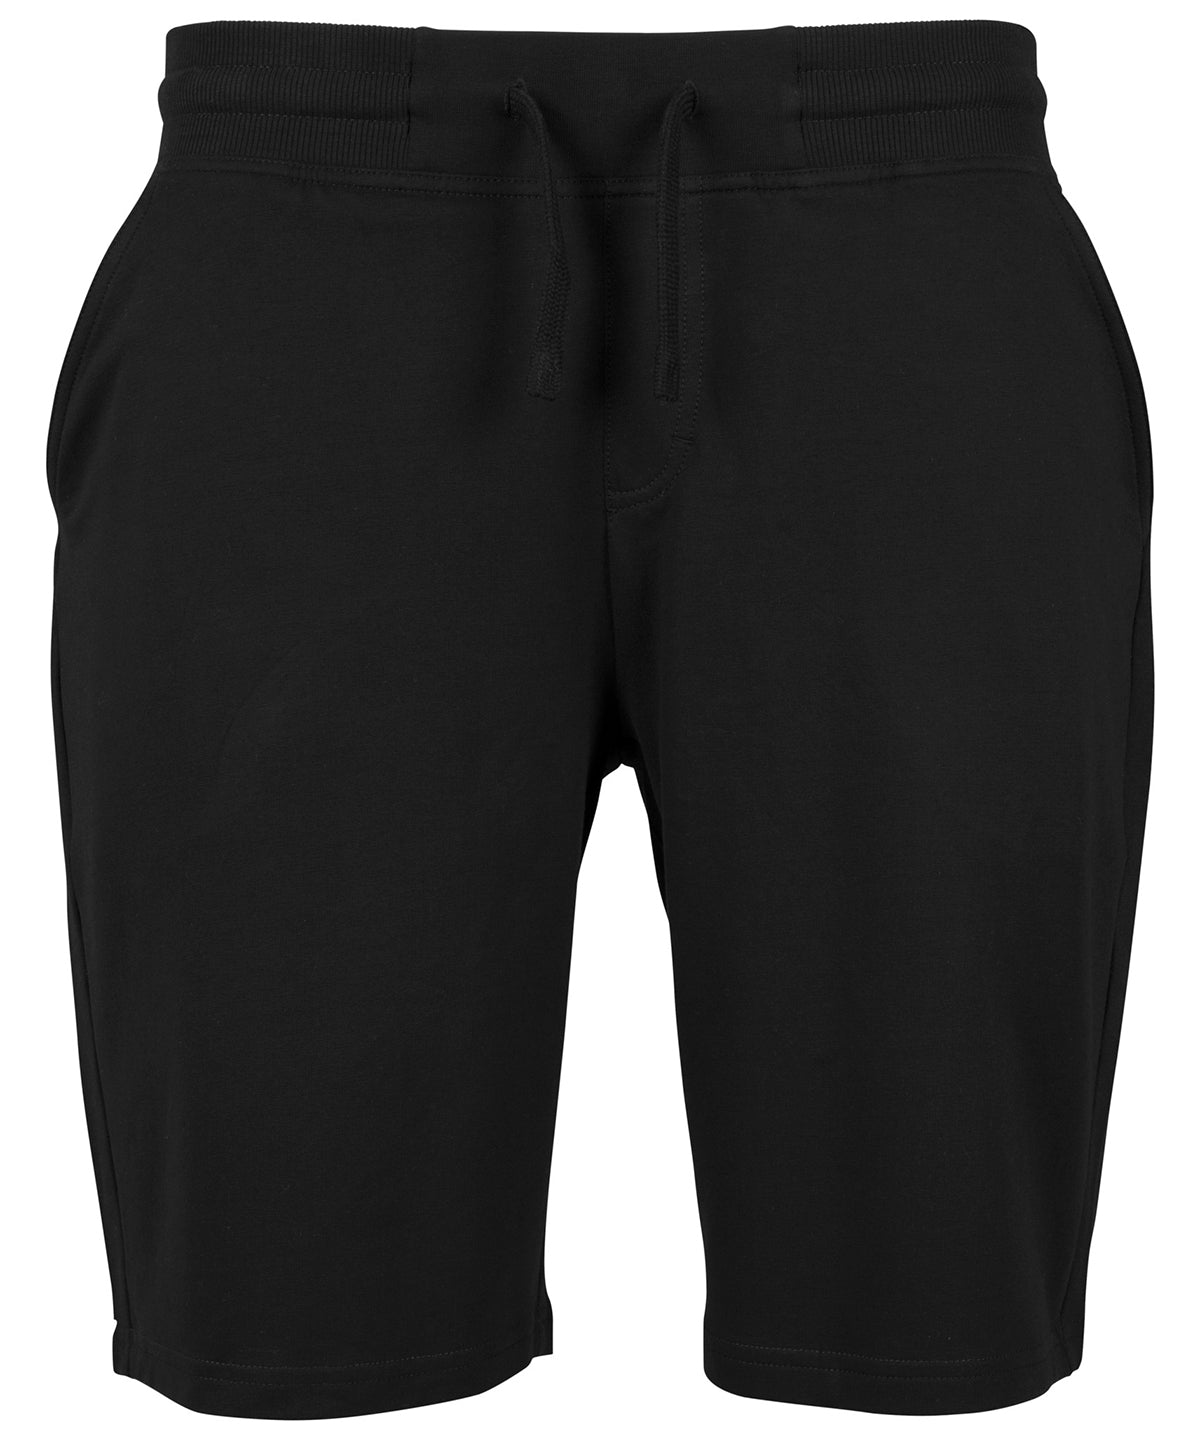 Personalised Shorts - Black Build Your Brand Terry shorts